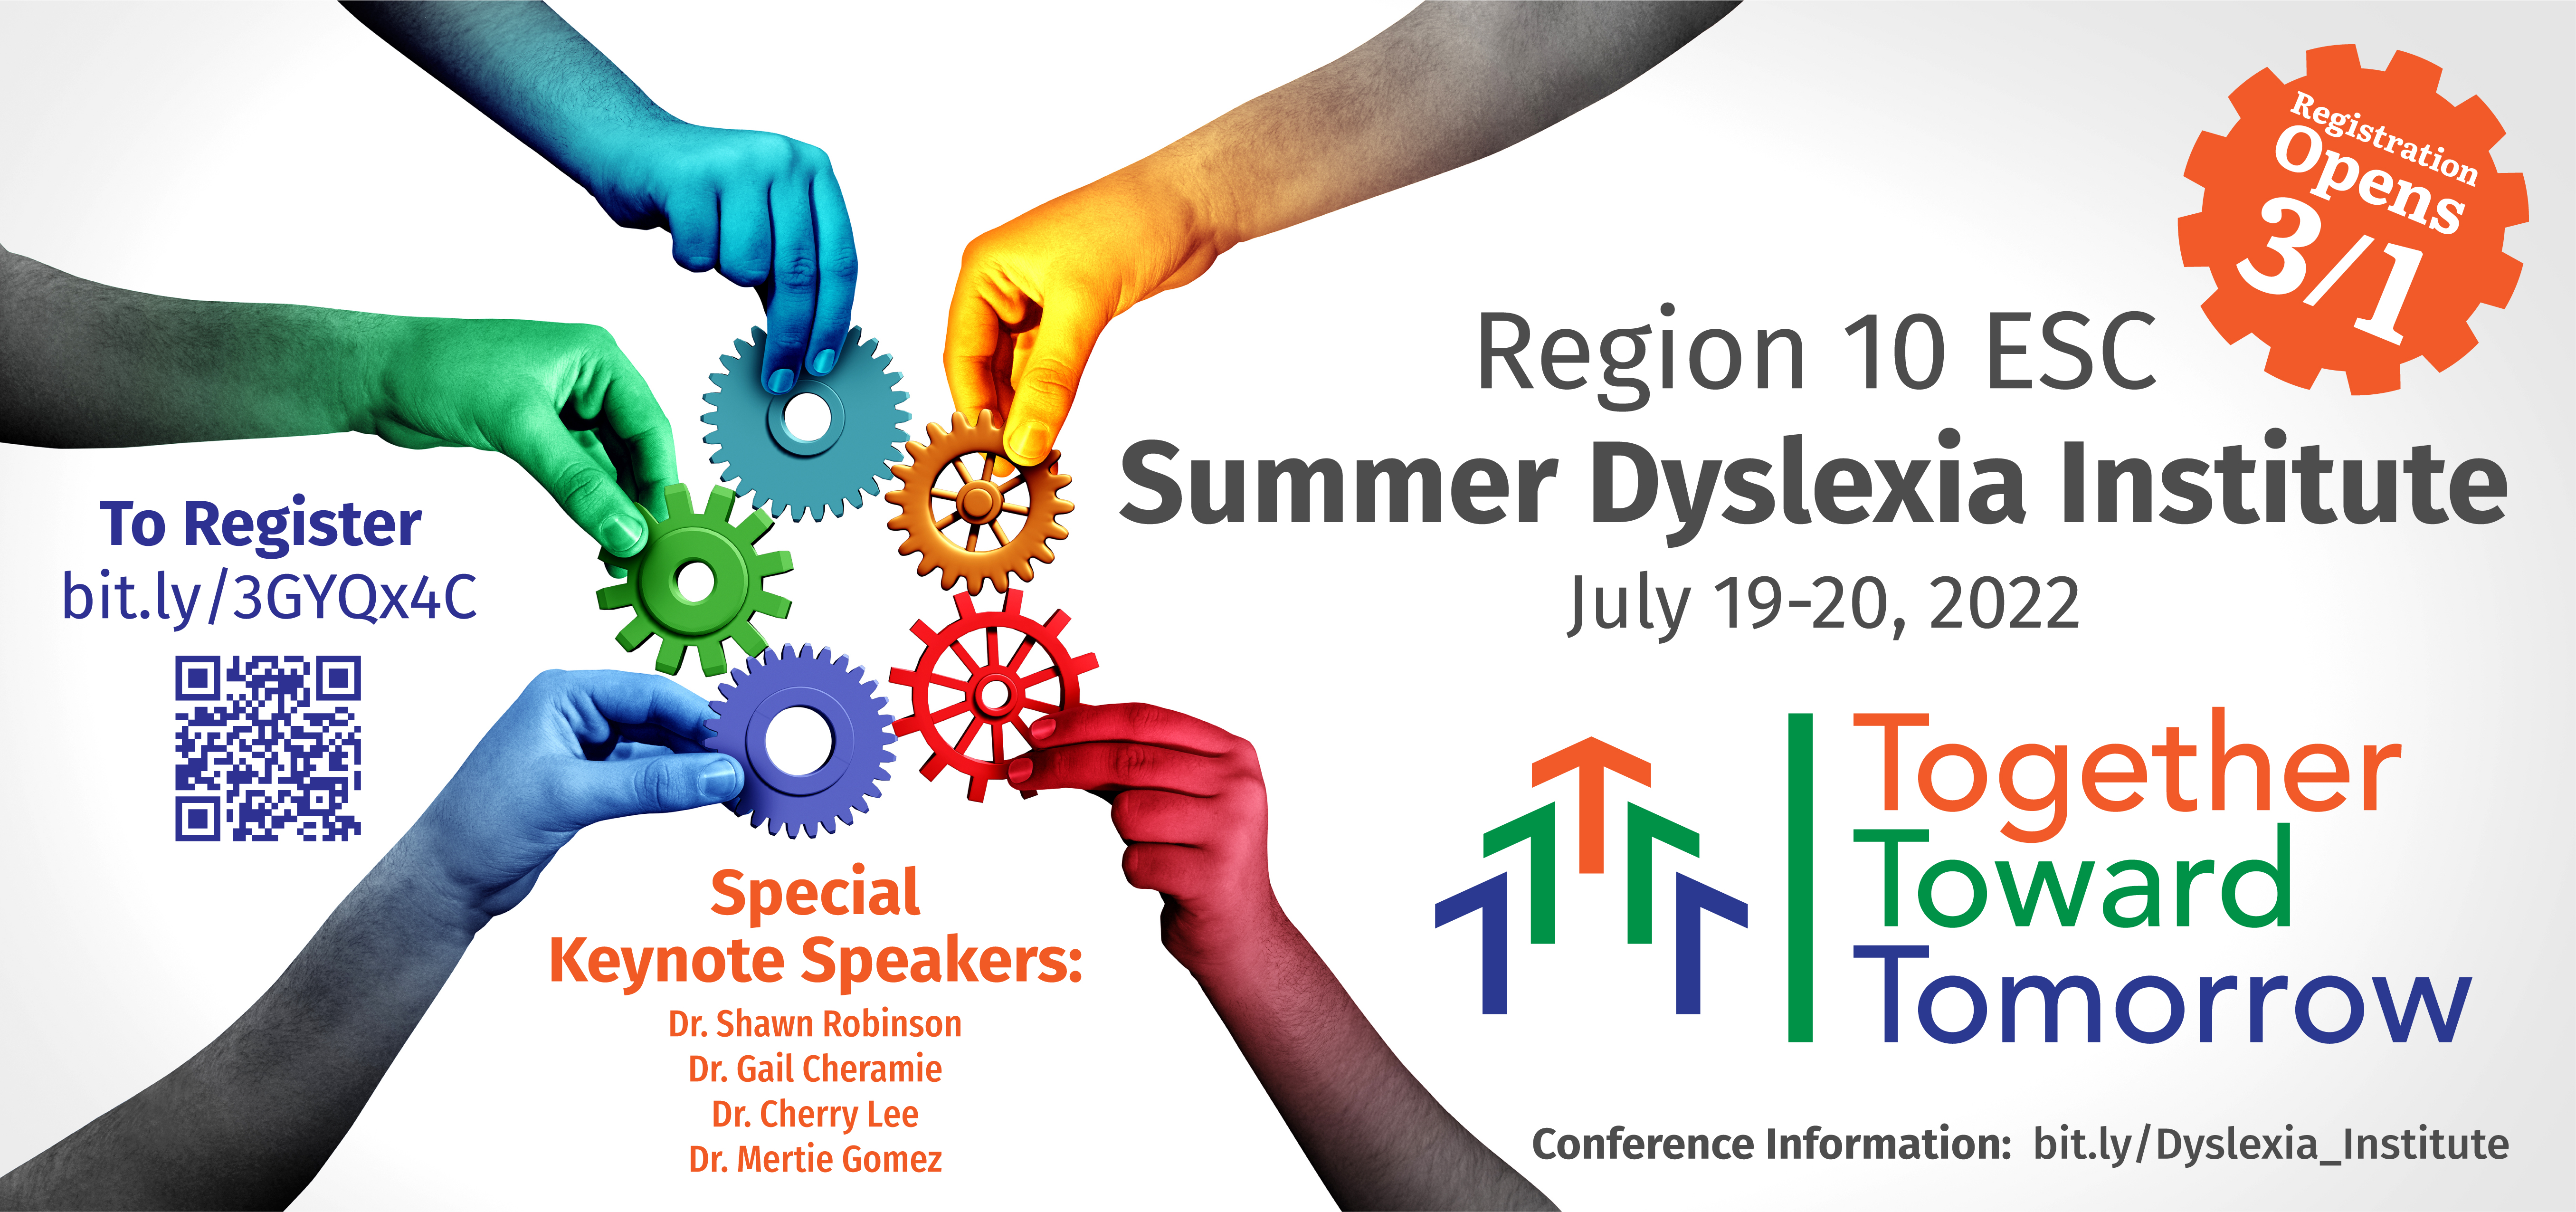 Dyslexia Summer Institute Flyer - July 19-20, 2022. Special Keynote Speakers: Dr. Shawn Robinson, Dr. Gail Cheramie, Dr. Cherry Lee, Dr. Mertie Gomez. Together, Toward Tomorrow. Registration Opens March 1, 2022